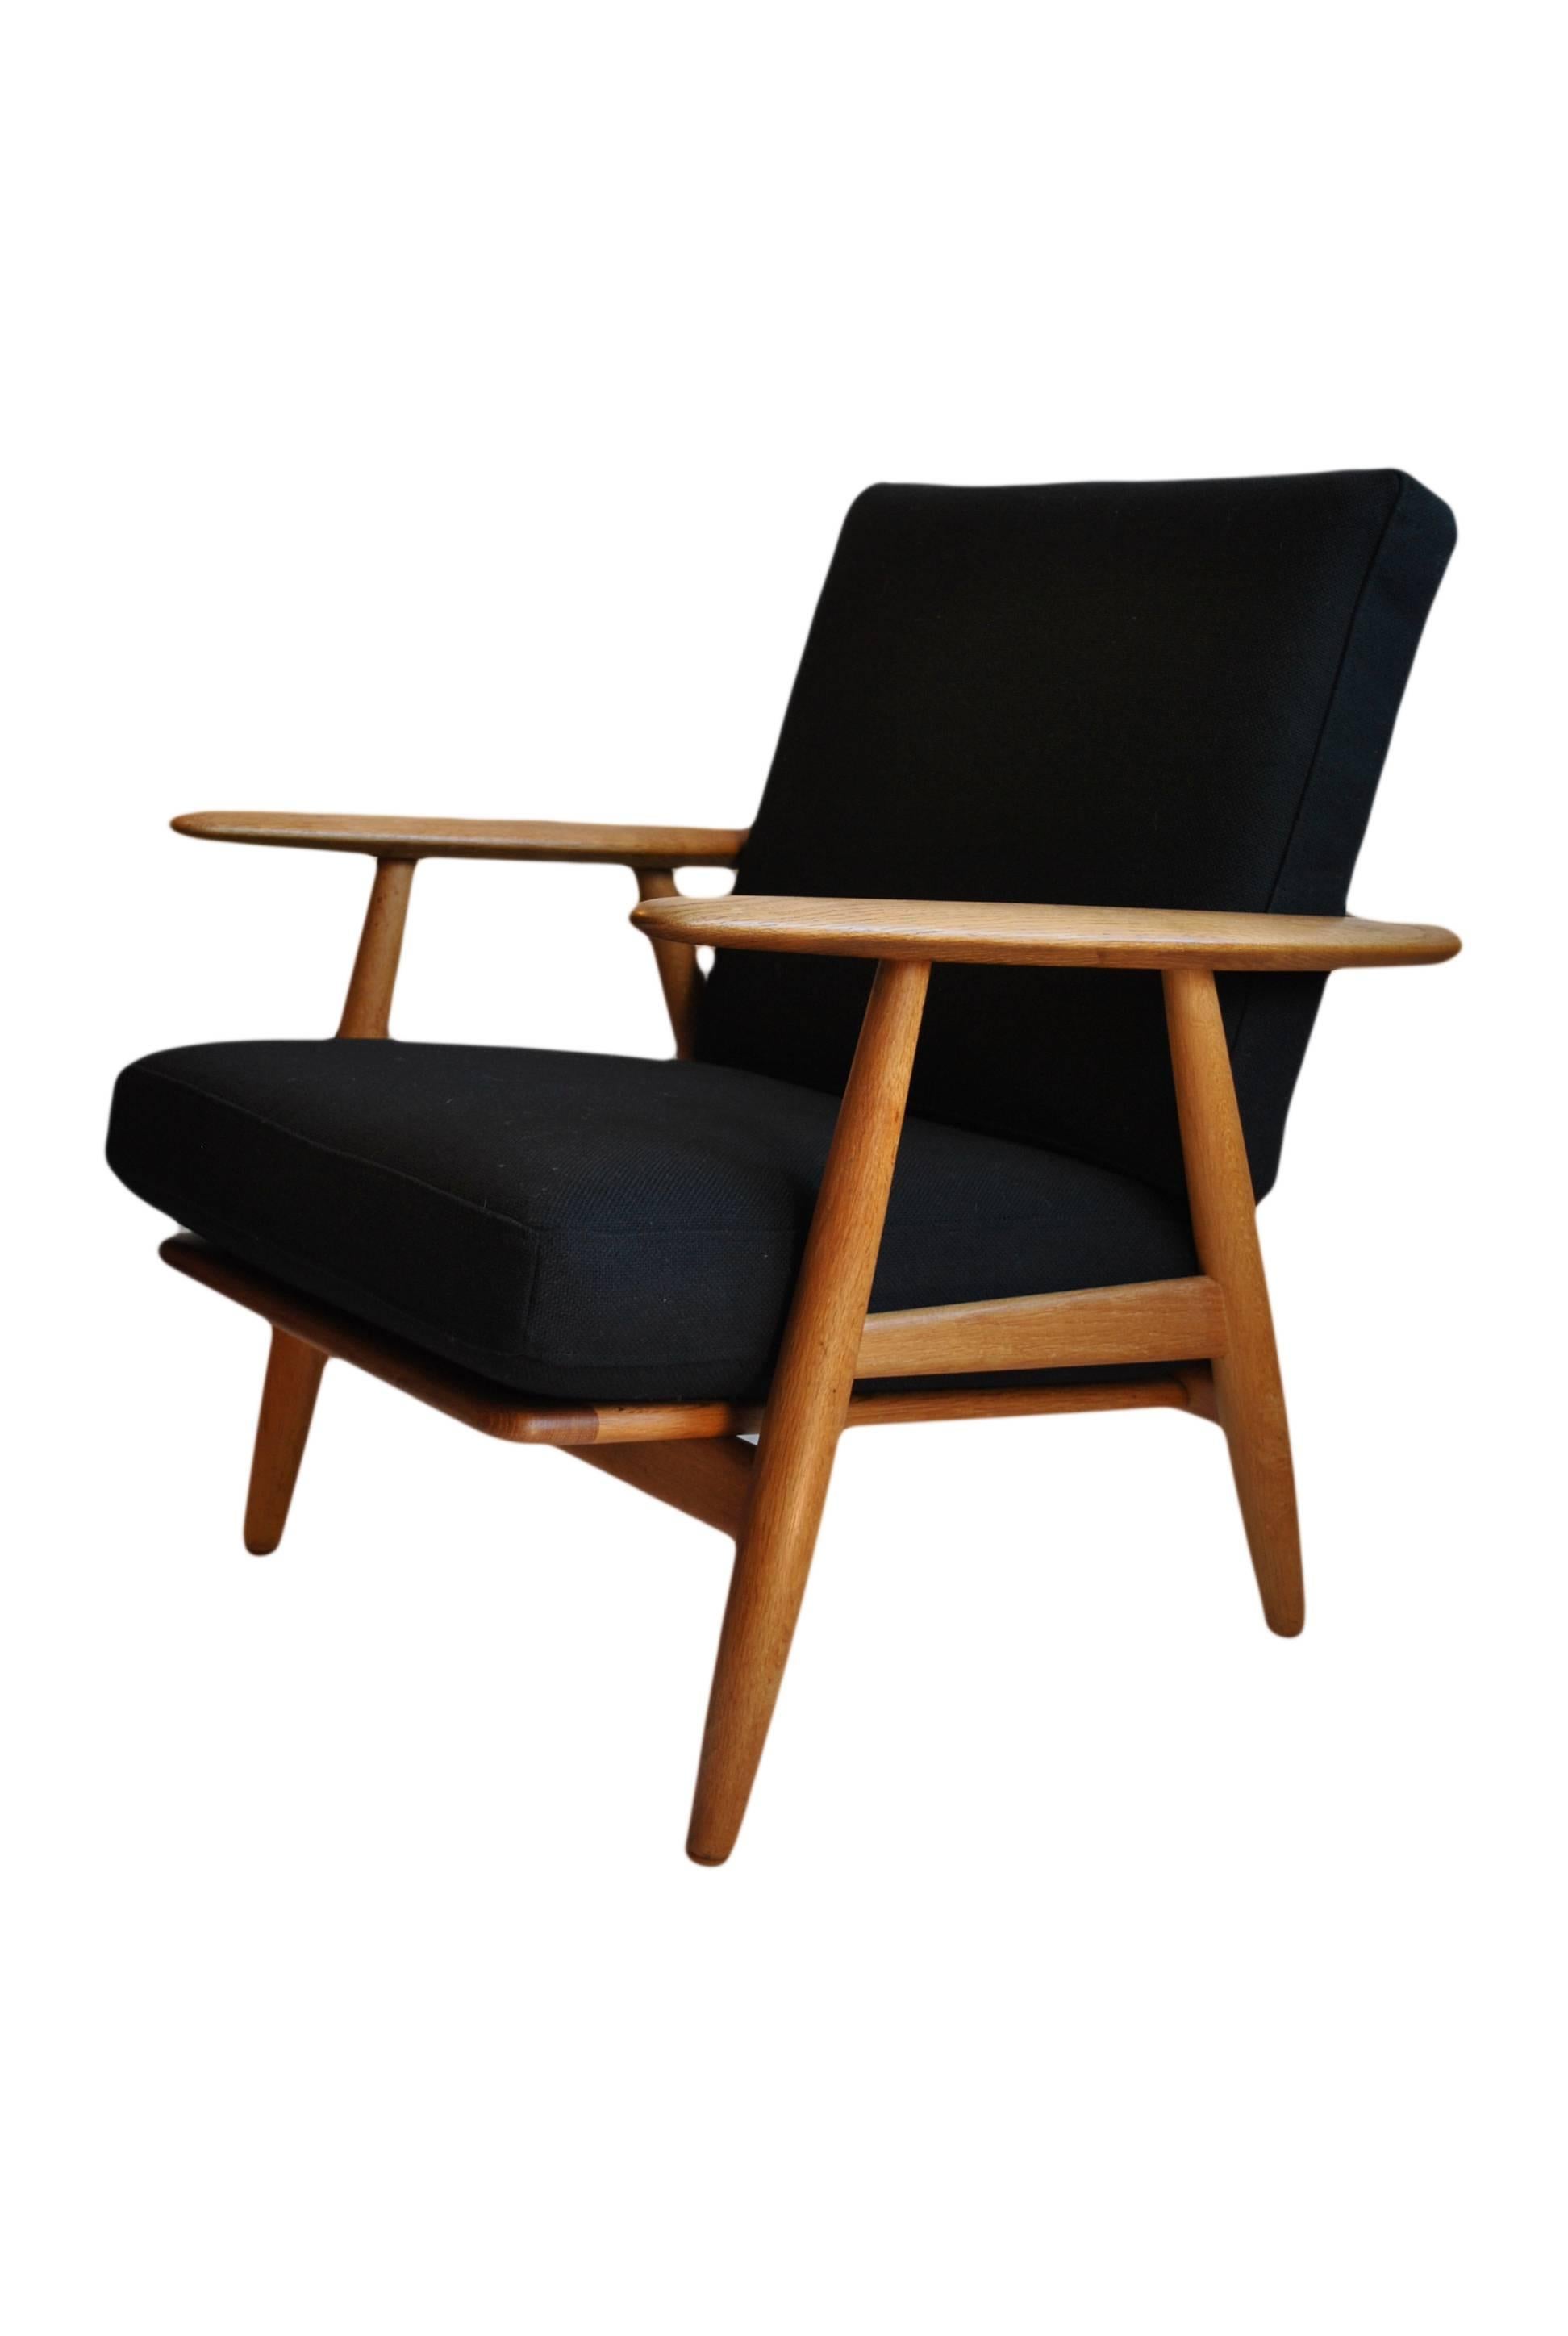 Model GE240 Hans J Wegner 'cigar' chair. Early GETAMA version in Oak. New black wool/cotton weave upholstery. Other upholstery available.
Makers stamps to underside.